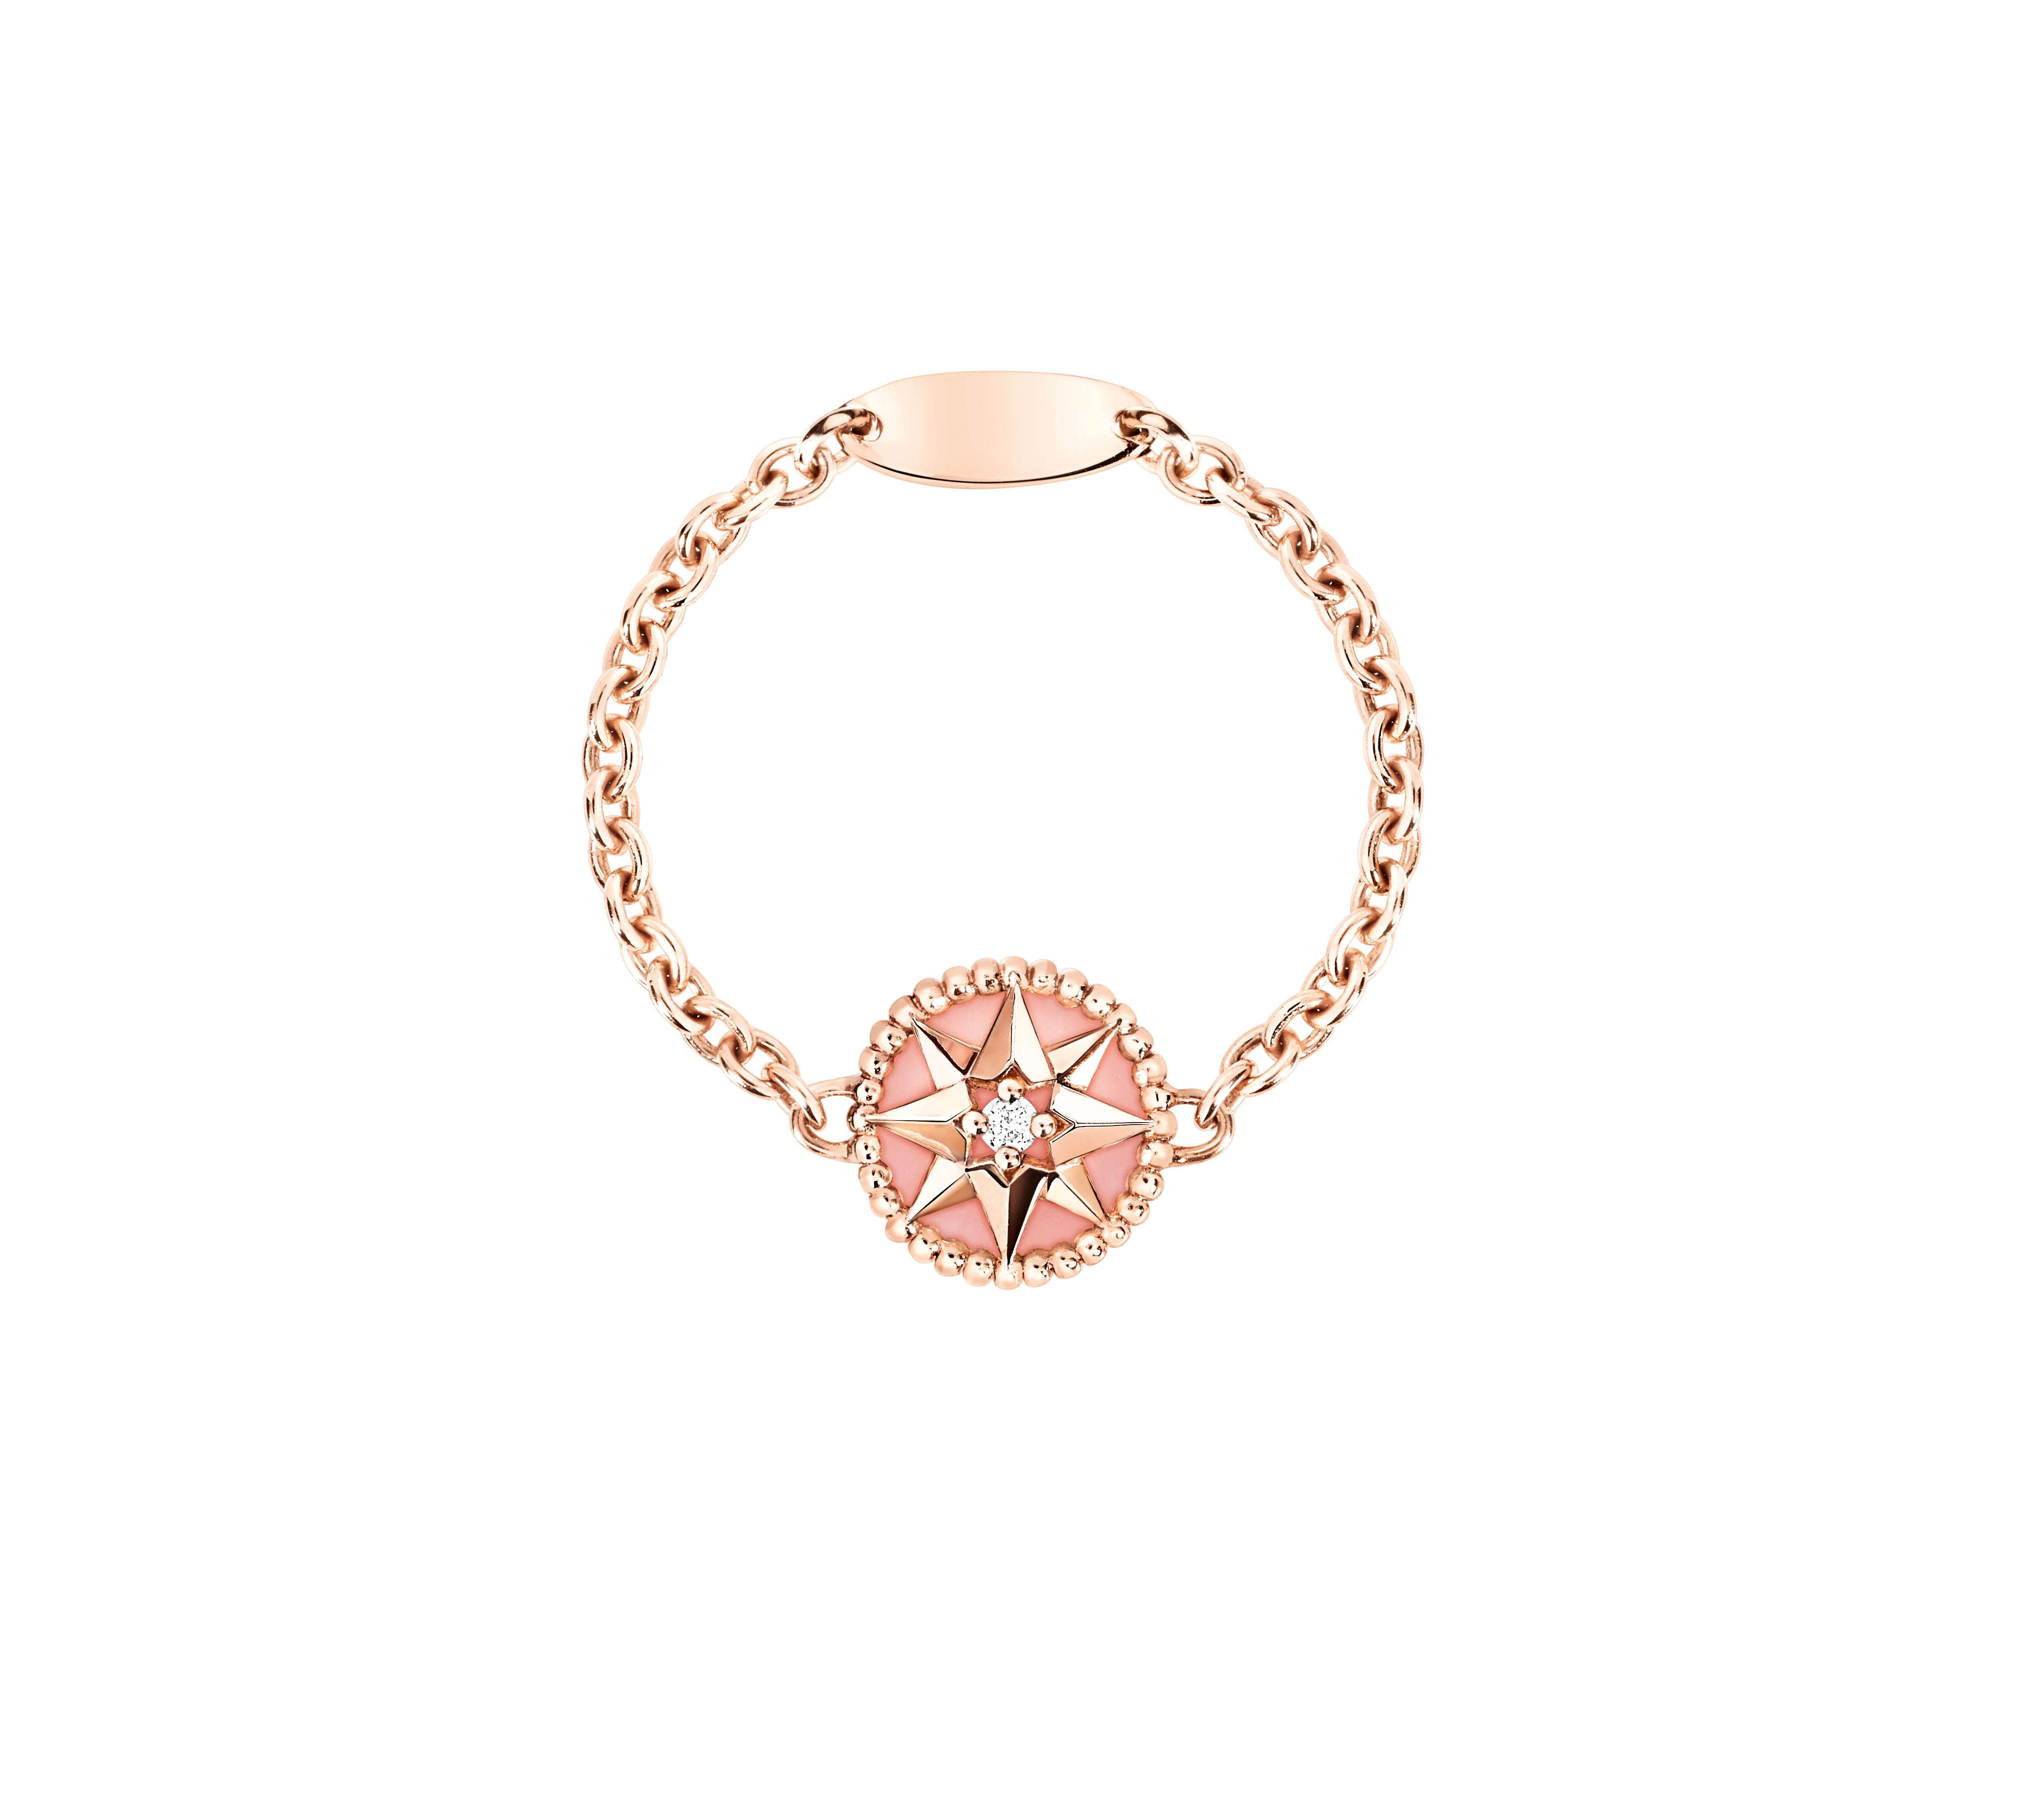 Dior Rose des Vents rings are reversible